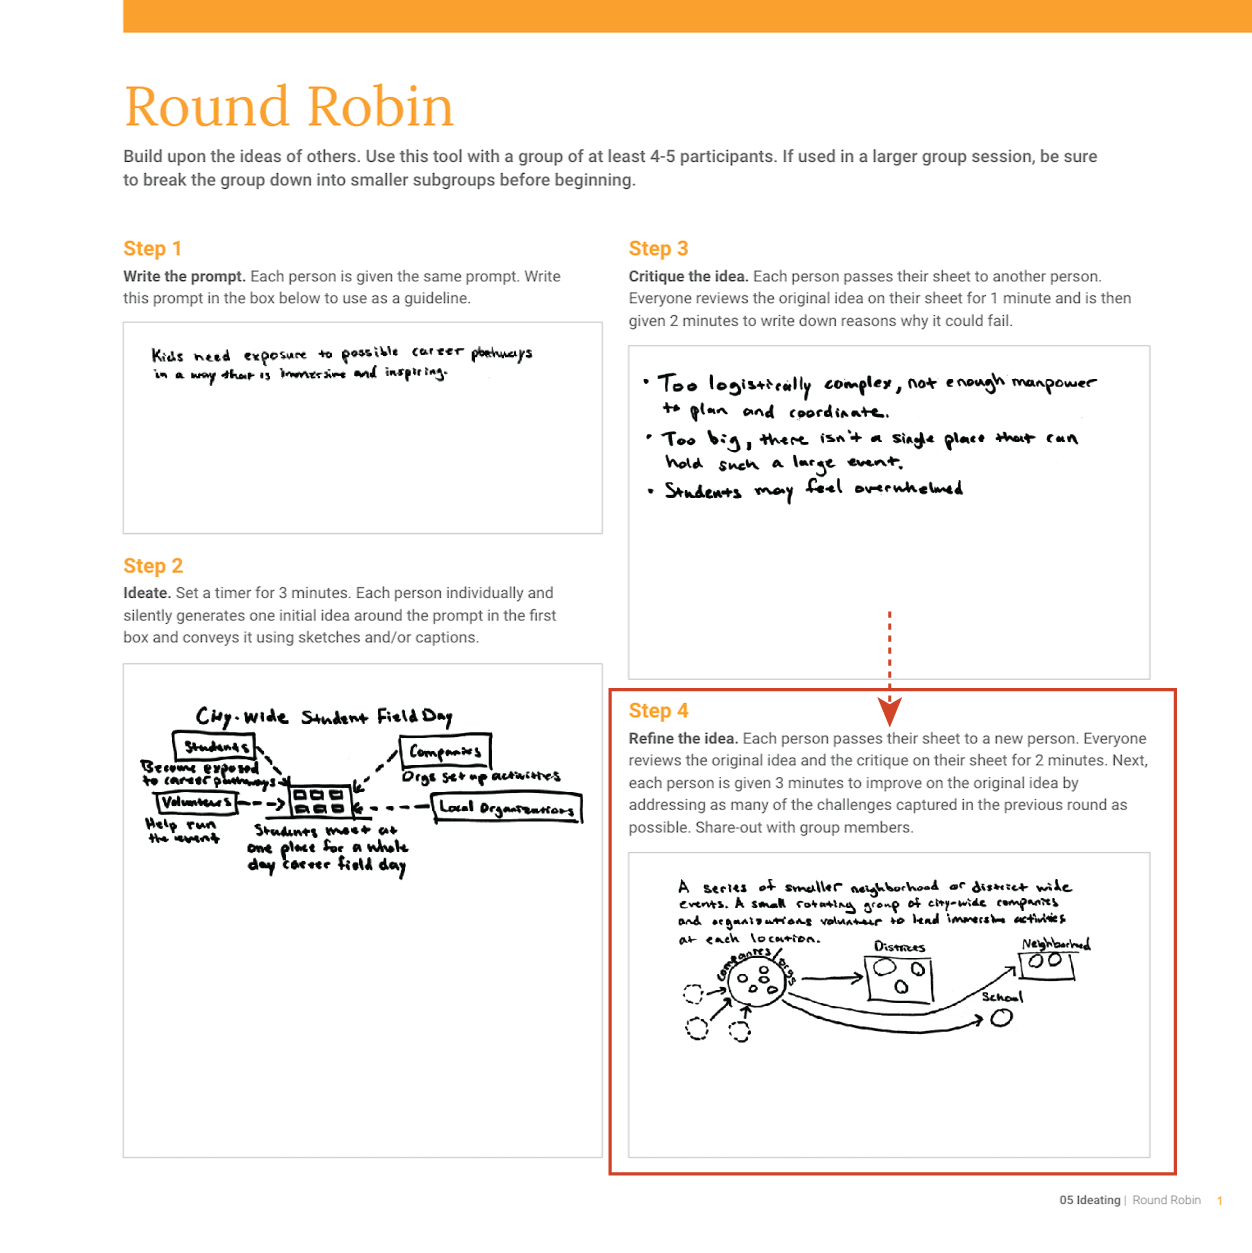 image of round robin worksheet with step 4 filled in